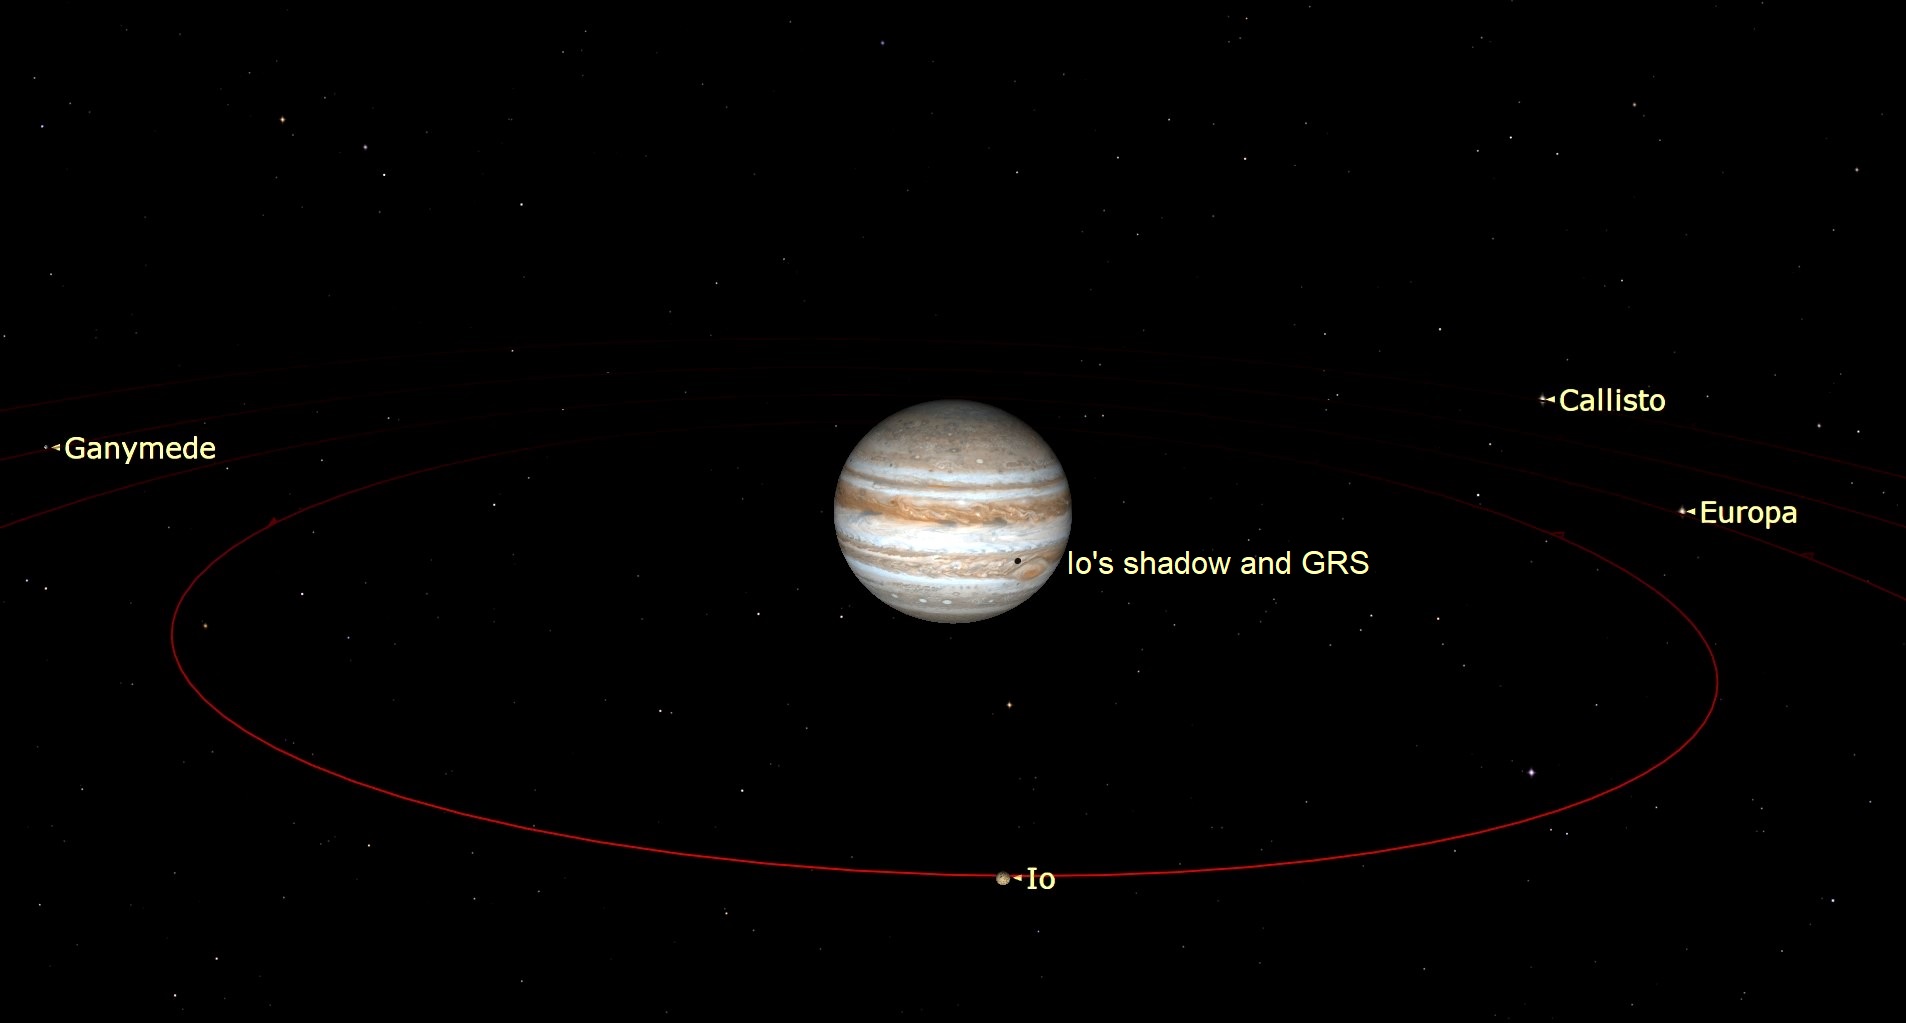 Graphic showing Jupiter at the center of the image with Callisto, Europa, Io and Ganymede orbiting around the gas giant. A small black spot is visible on the surface of Jupiter, it is Io's shadow.